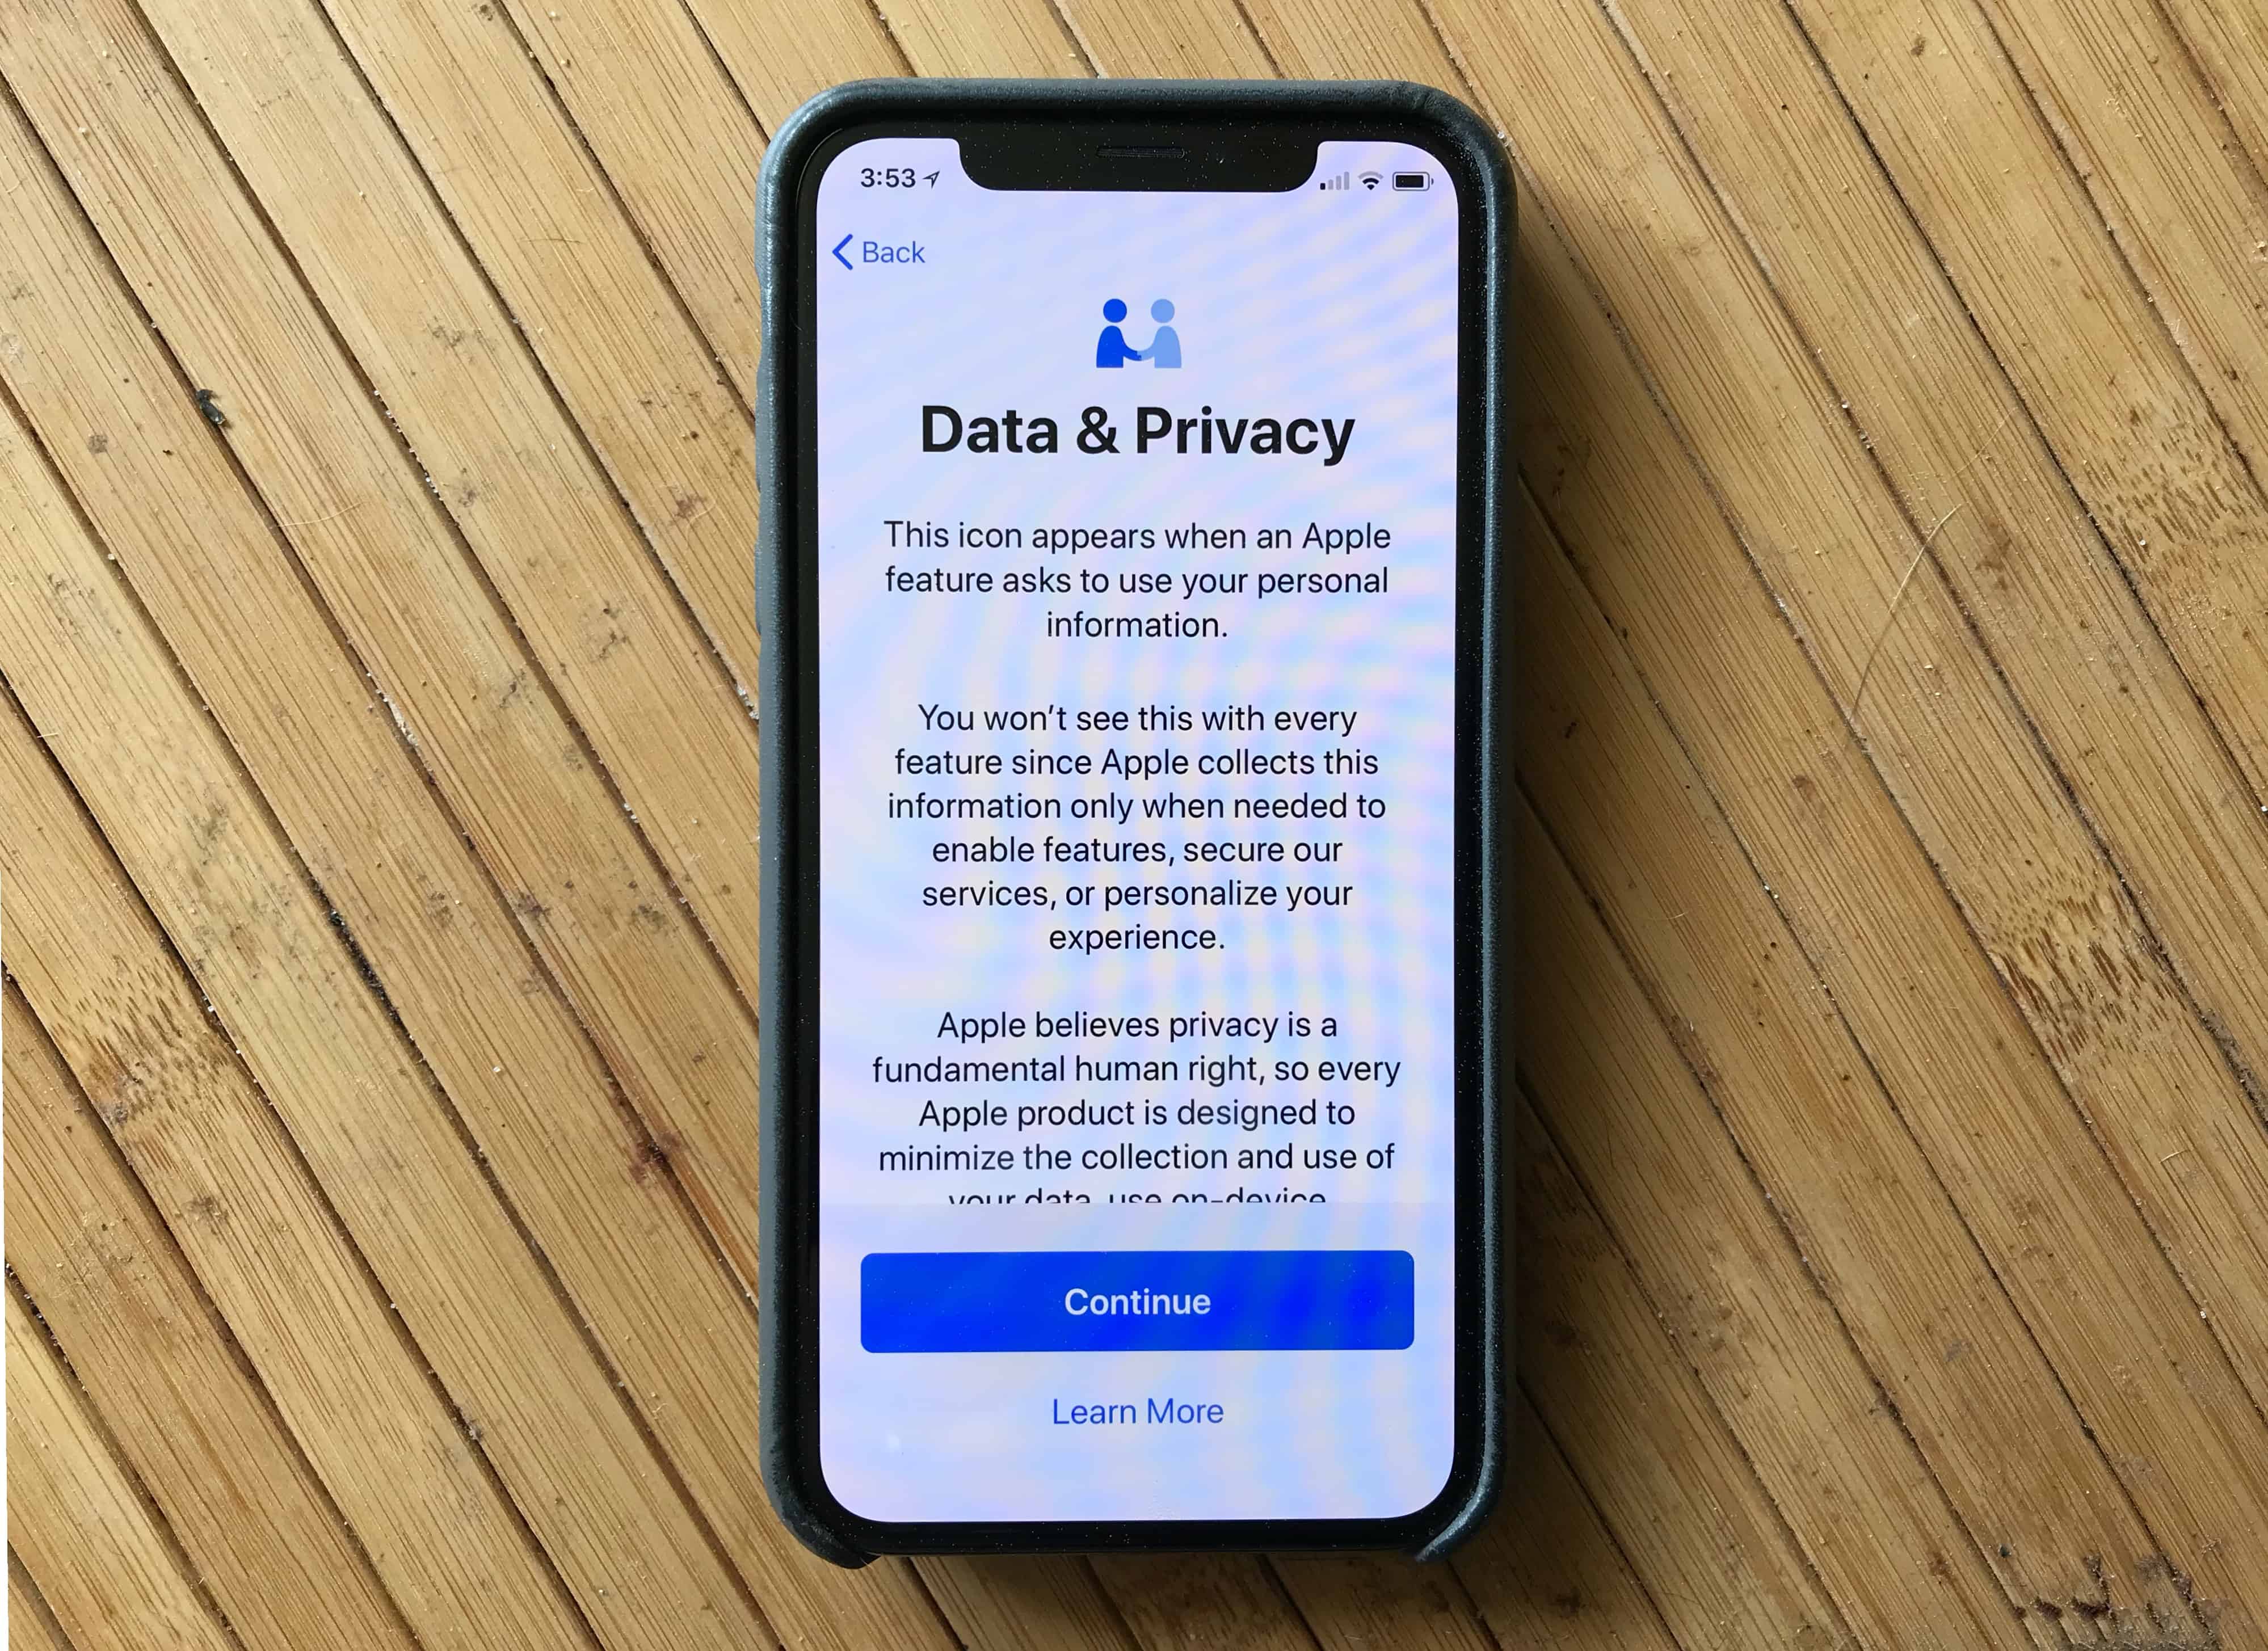 Apple takes privacy seriously